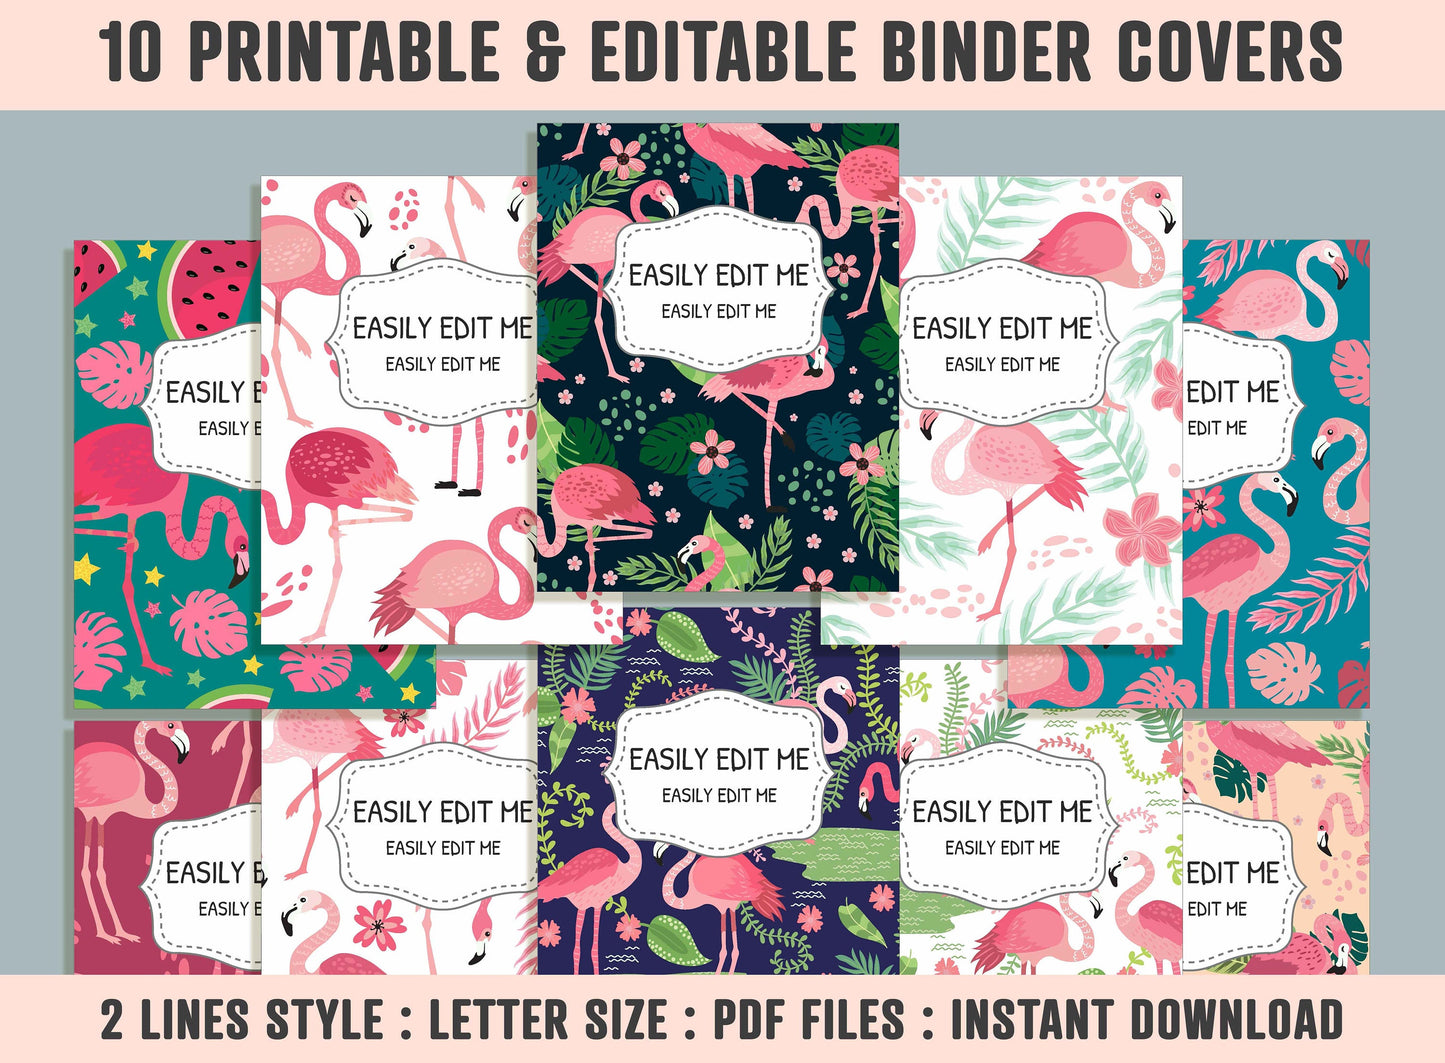 Flamingos in Different Poses Binder Cover, 10 Printable & Editable Covers + Spines, Teacher/School Binder Labels, Inserts, Planner Template